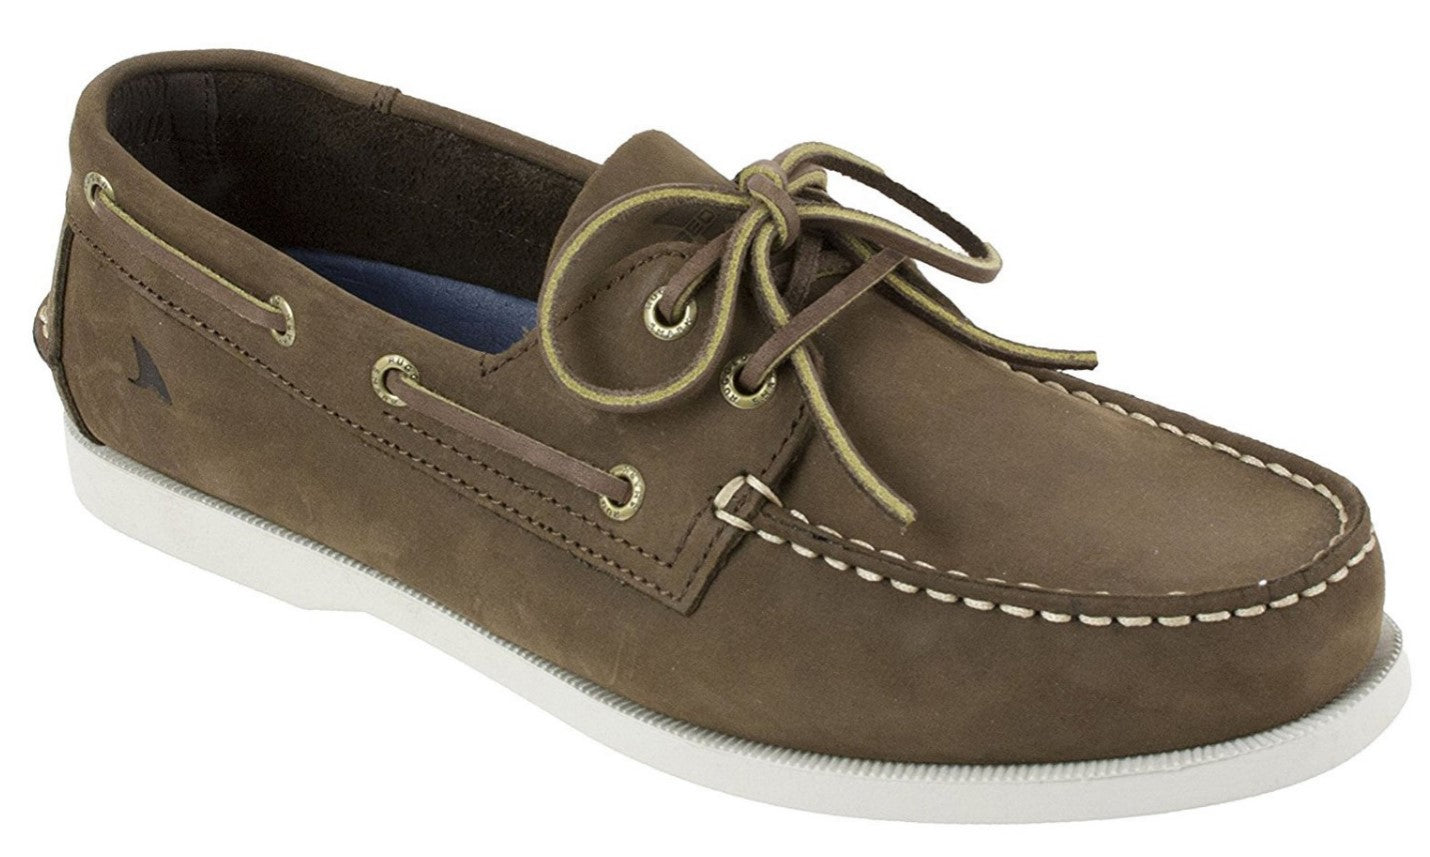 Rugged Shark Men S Boat Shoe Classic Look Premium Genuine Leather Select Pro